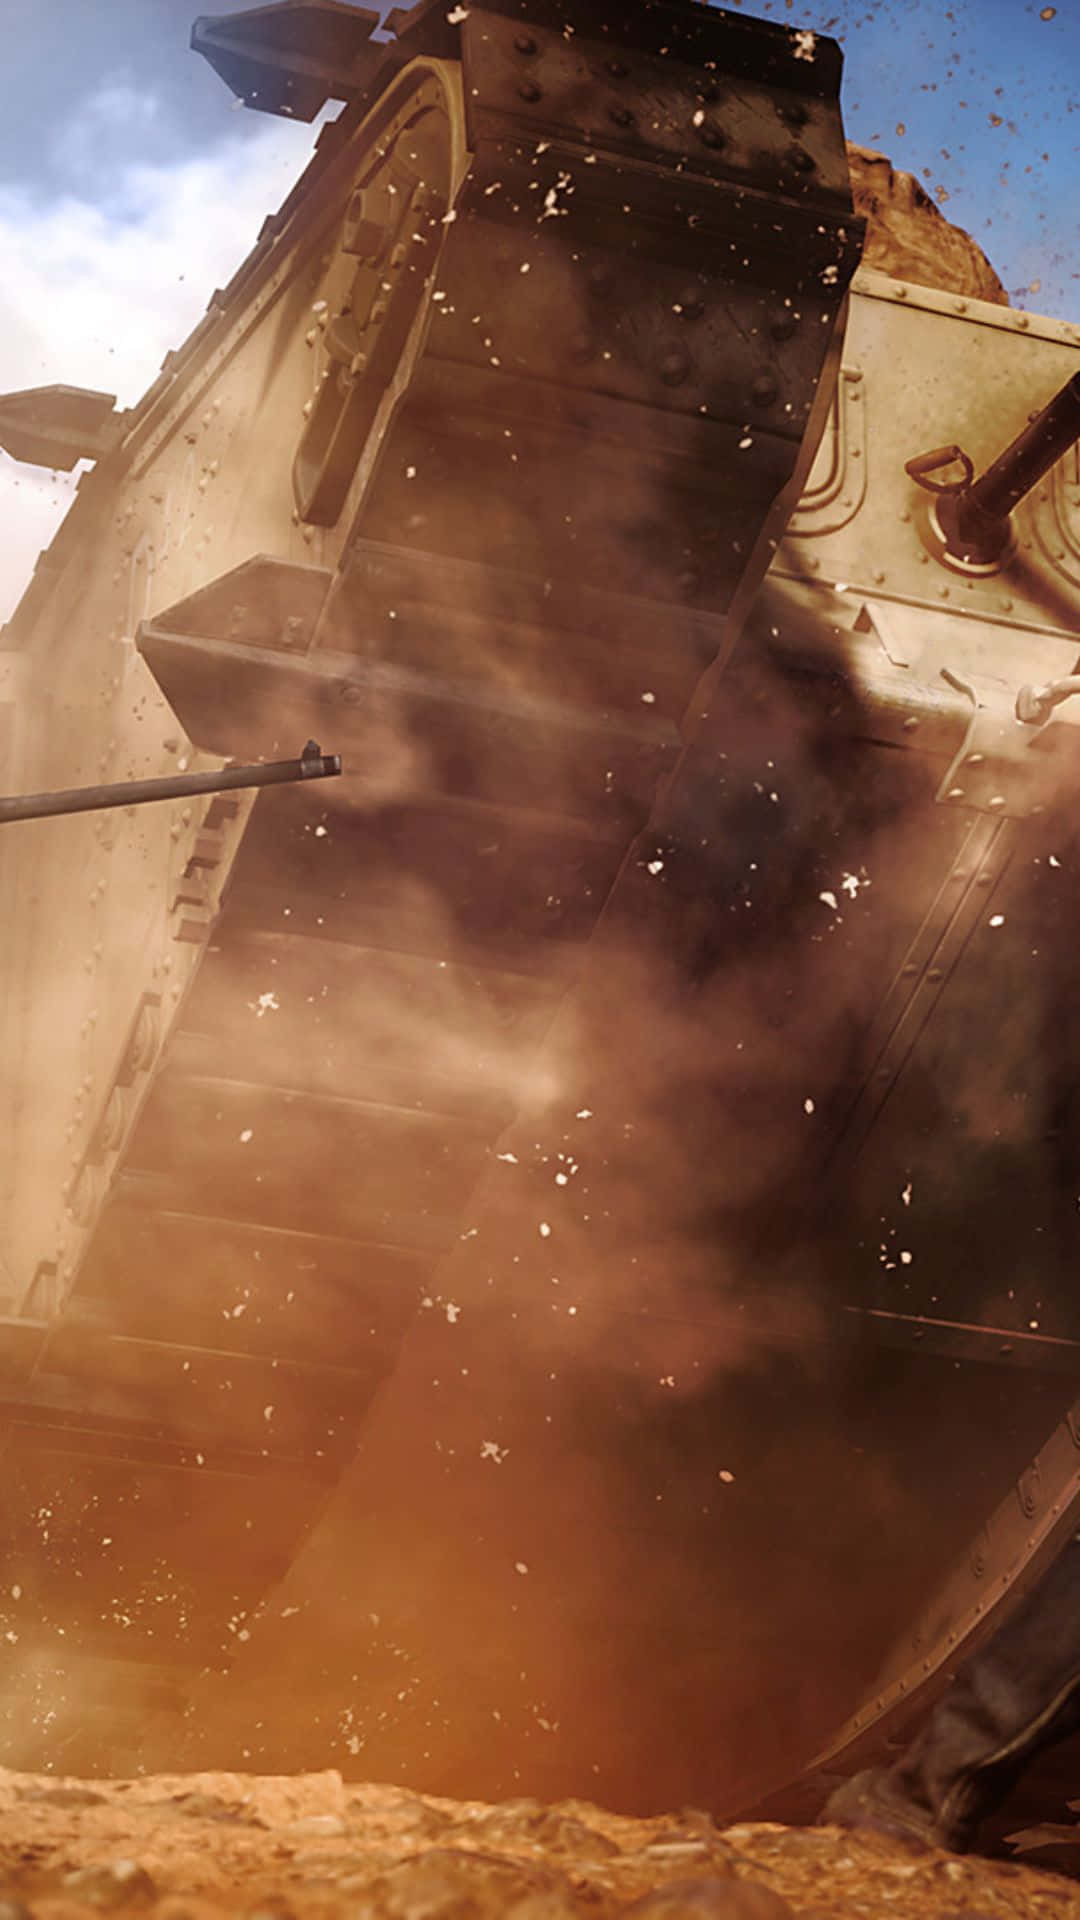 Android Battlefield 1 Background Rusty Tank